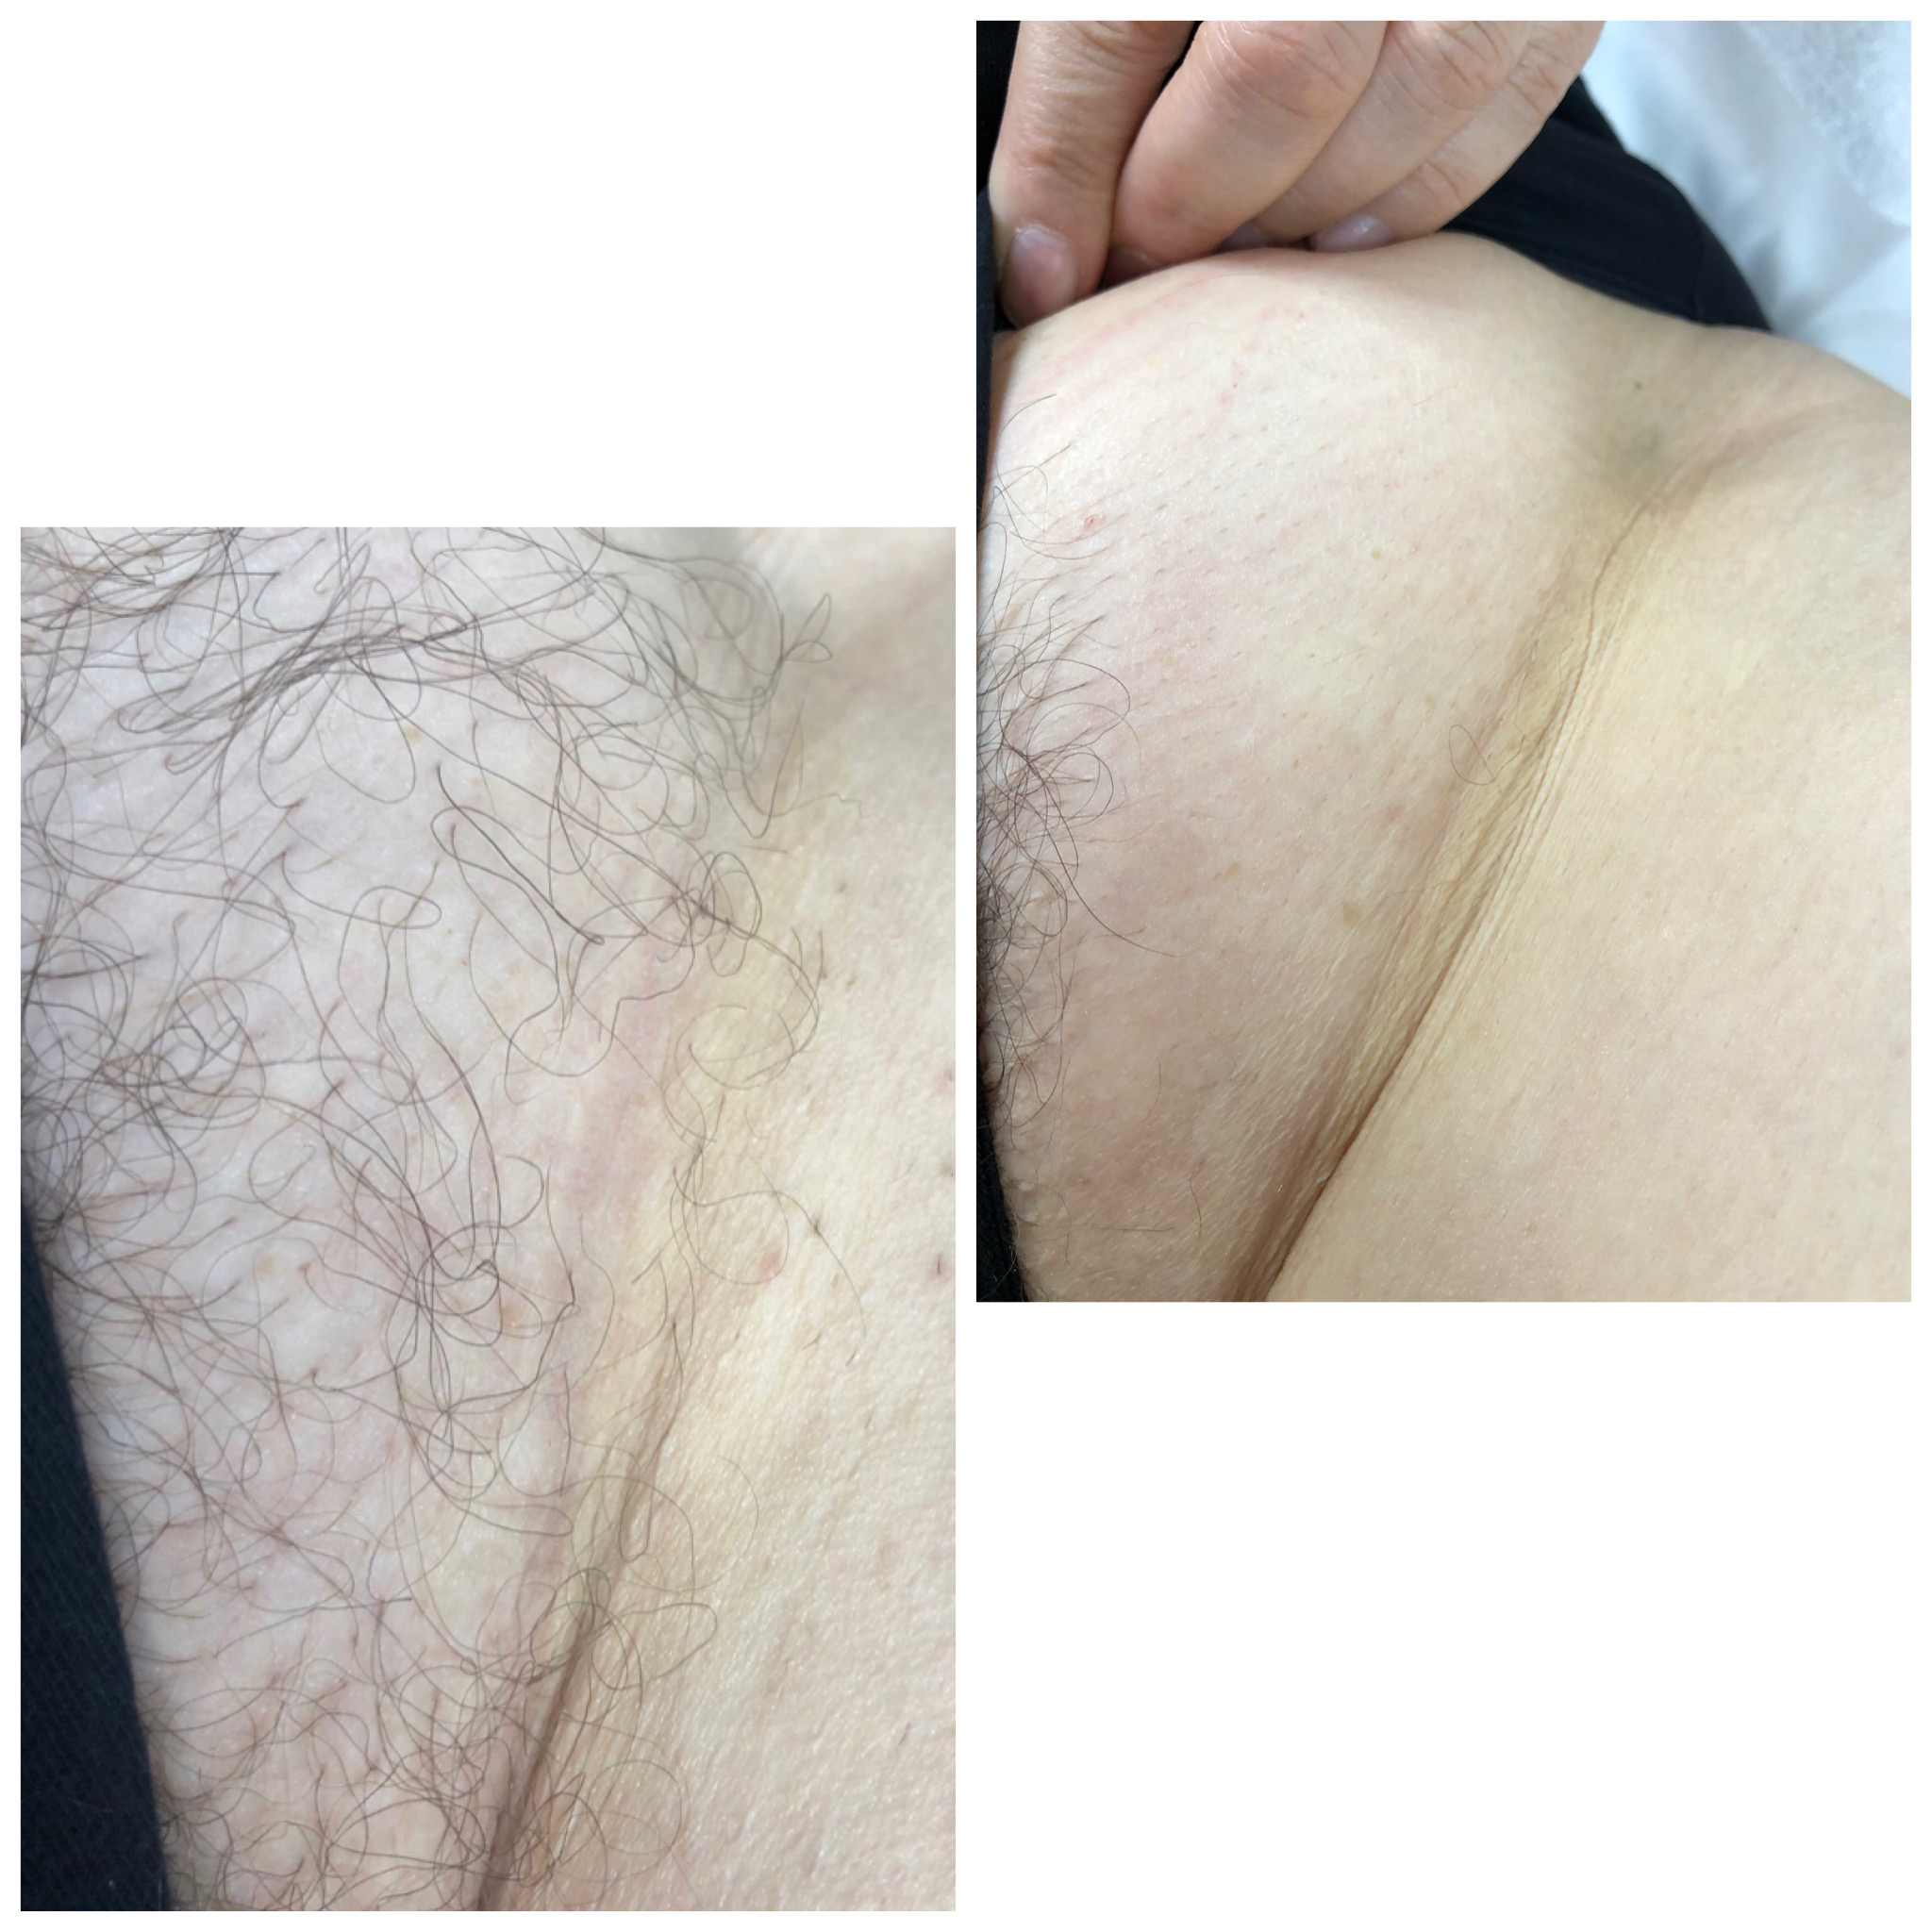 colin teo recommends Brazilian Wax Before And After Pictures